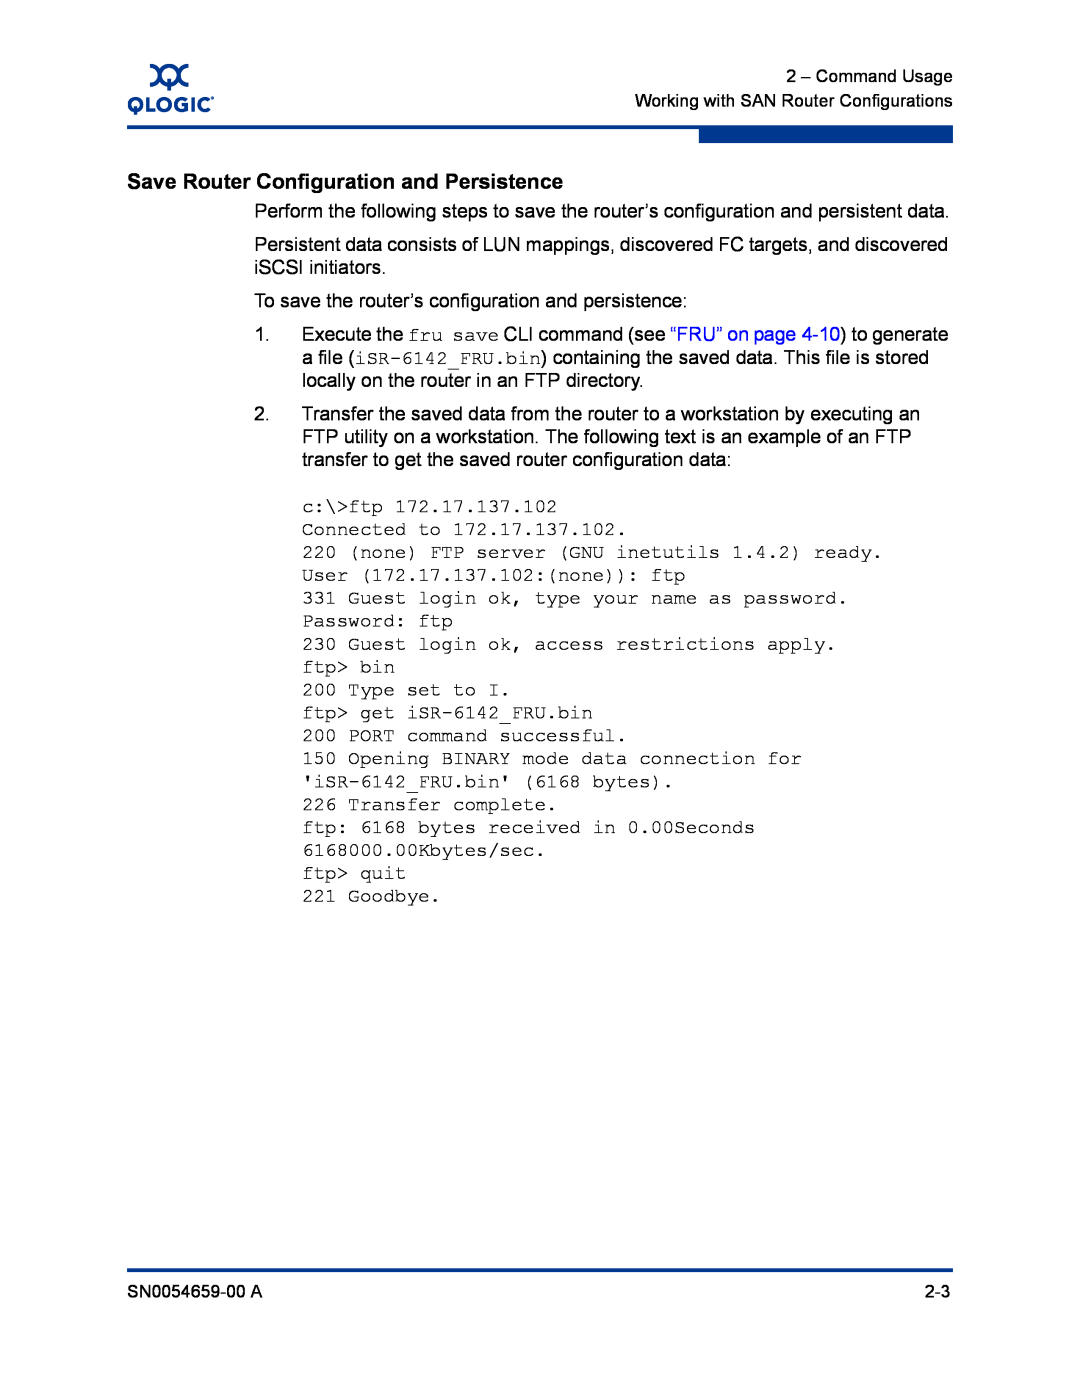 Q-Logic ISR6142 manual Save Router Configuration and Persistence 